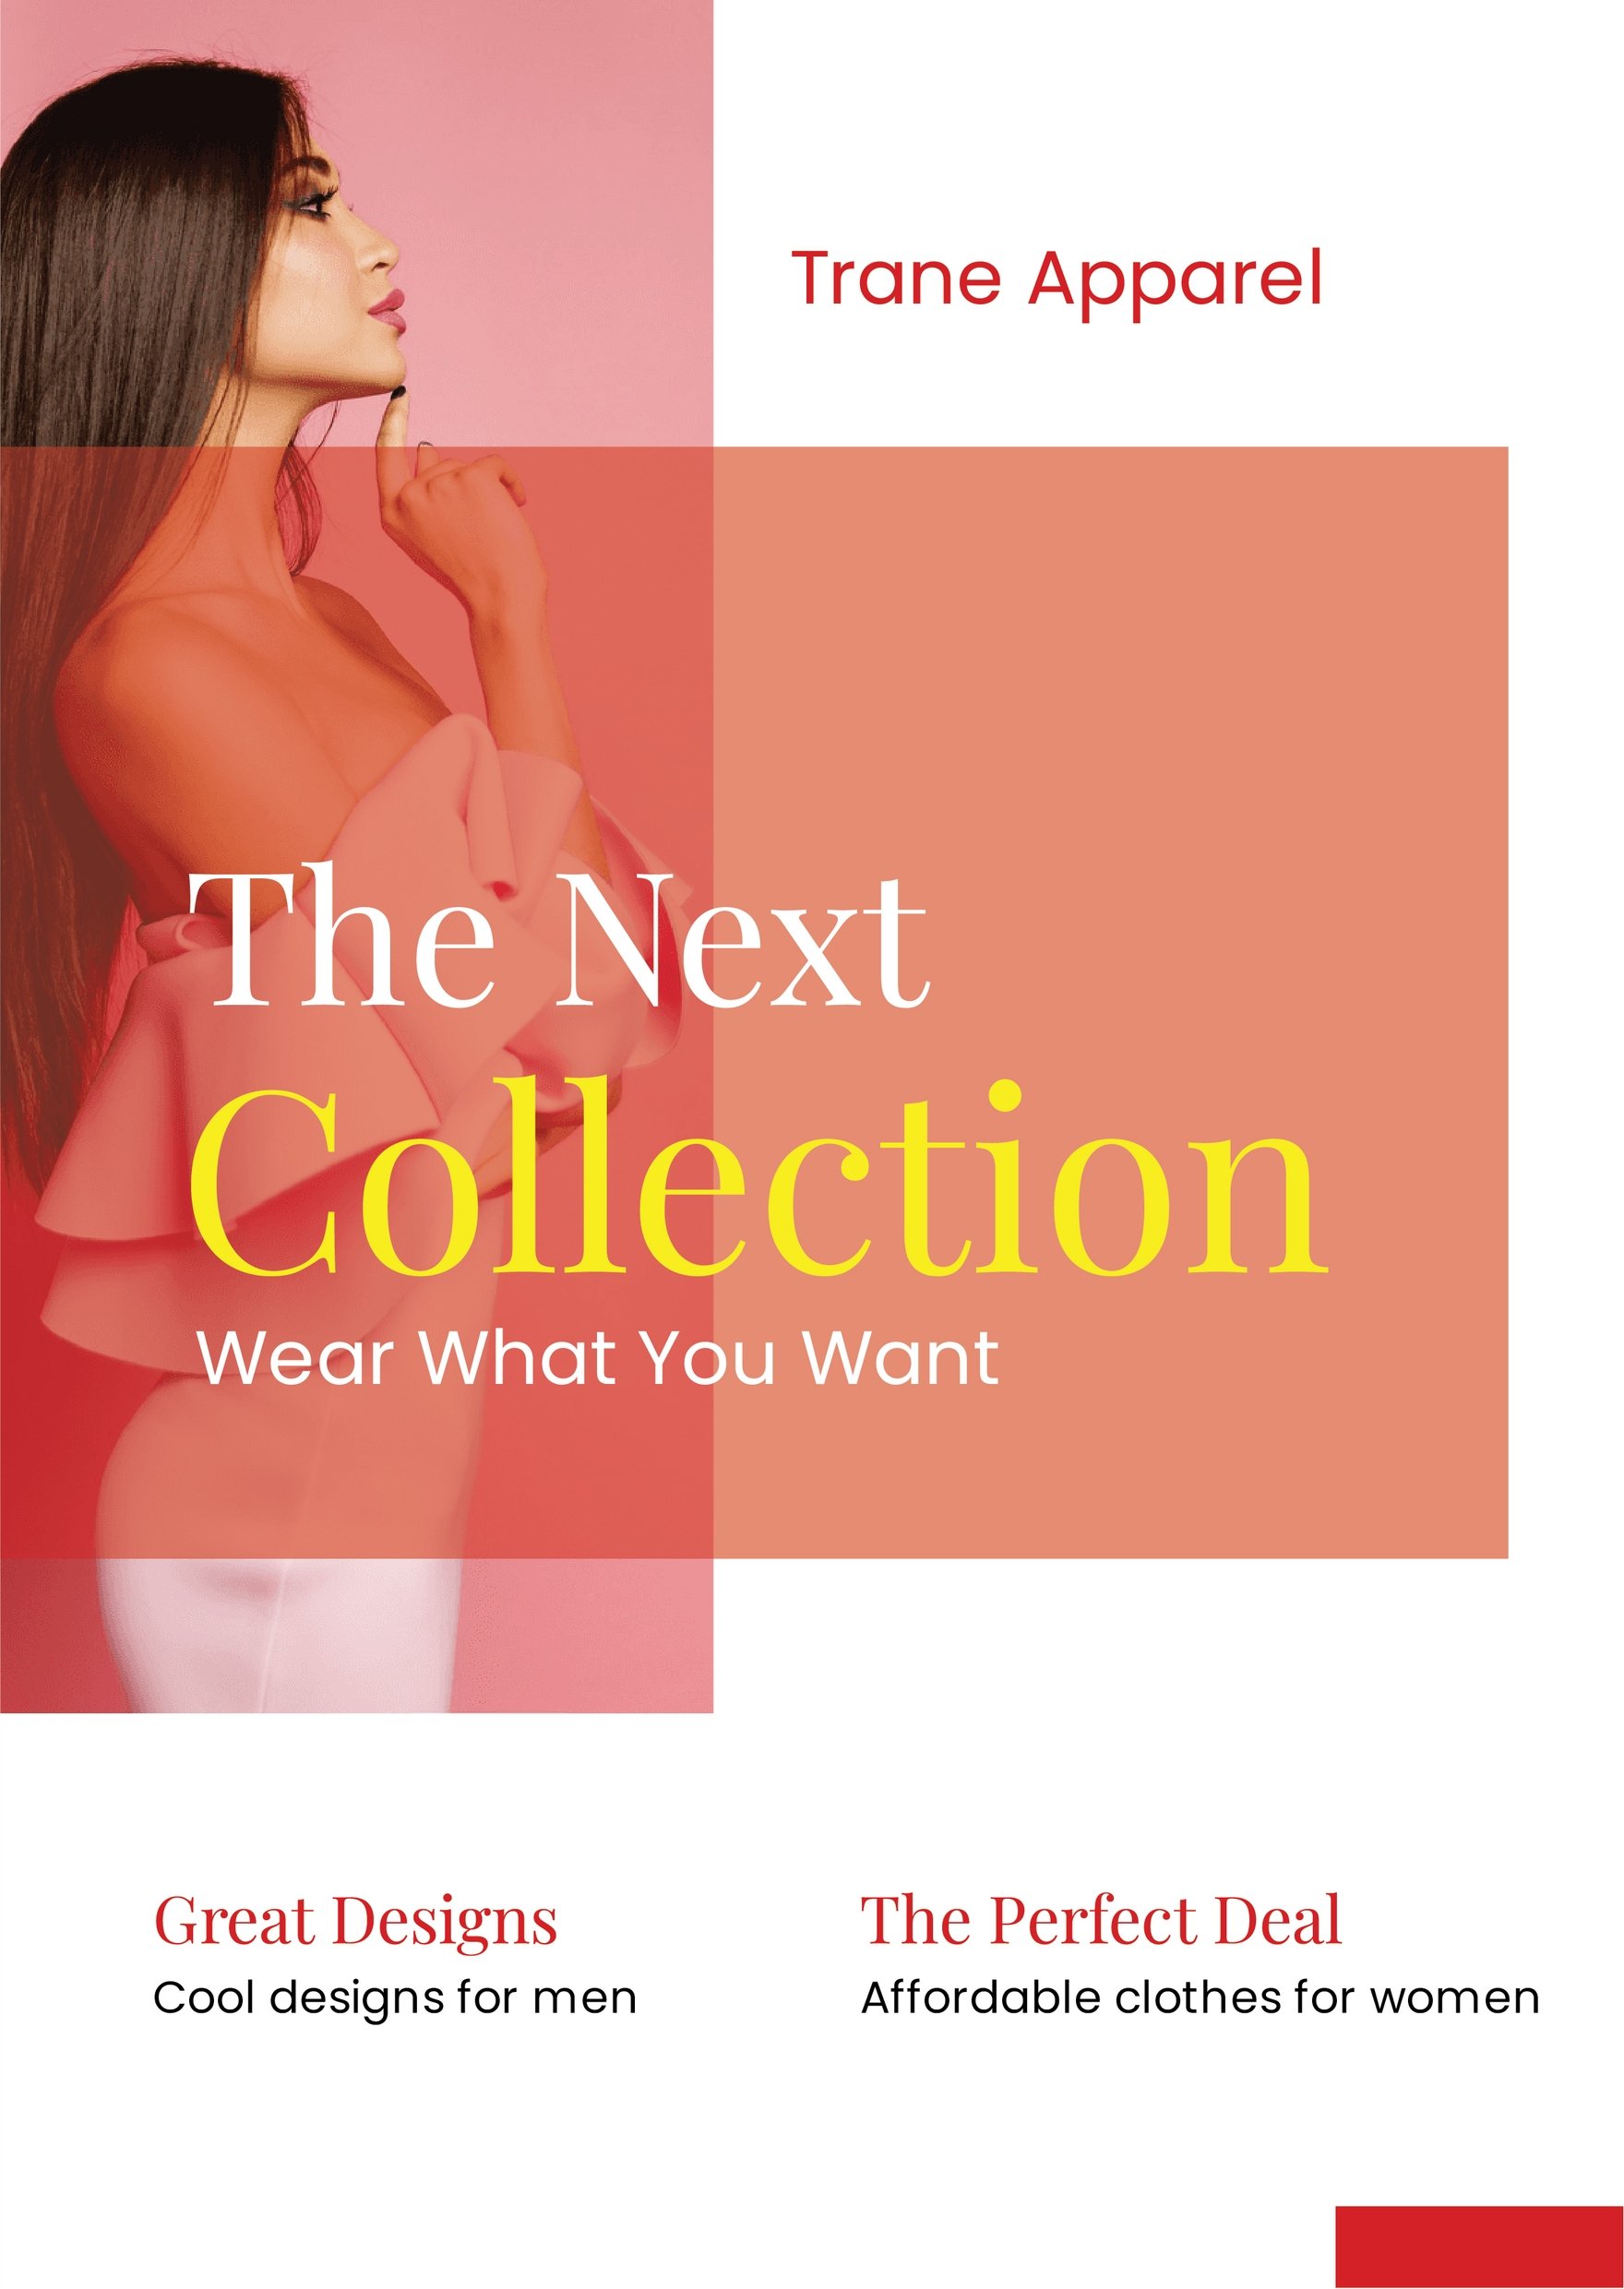 Fashion Booklet Template in Word, Google Docs, Illustrator, PSD, Apple Pages, Publisher, InDesign